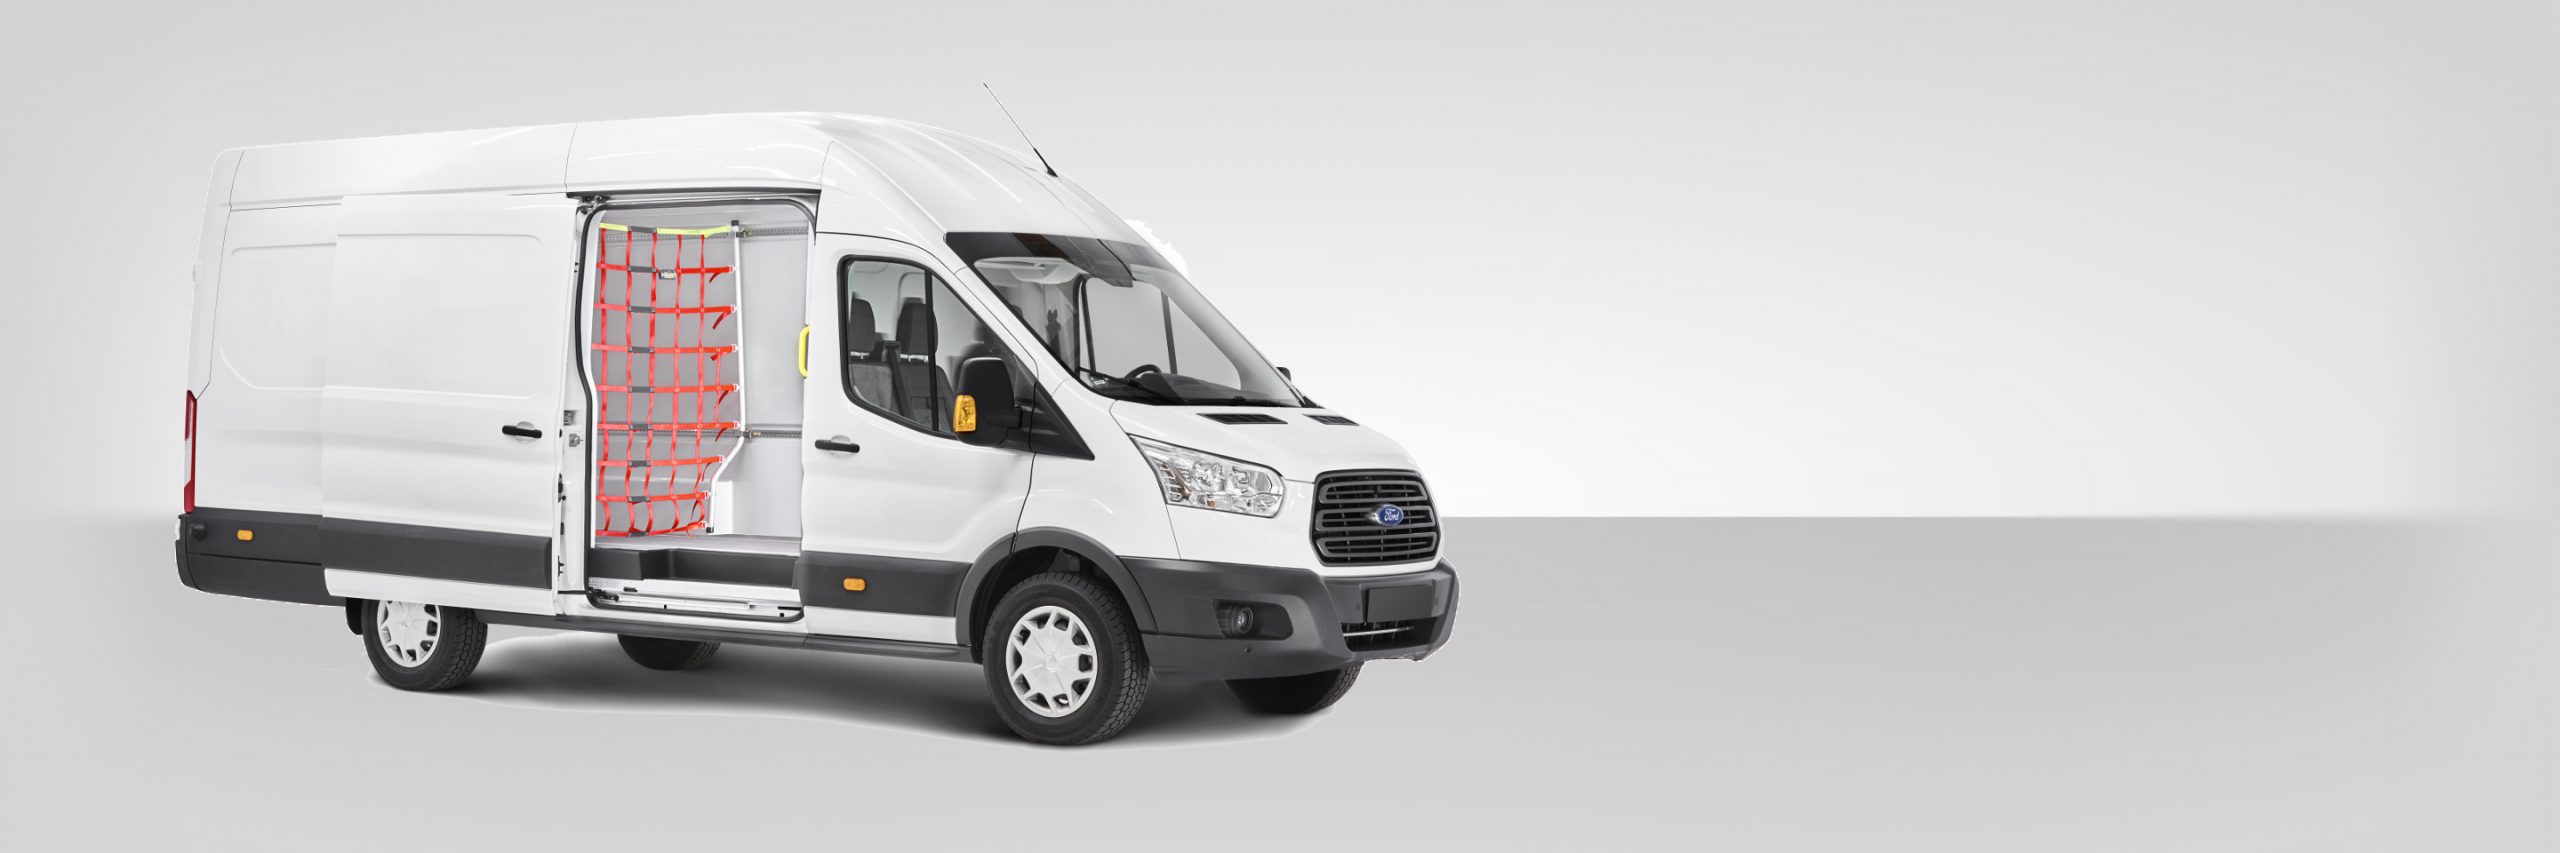 ford transit2x scaled